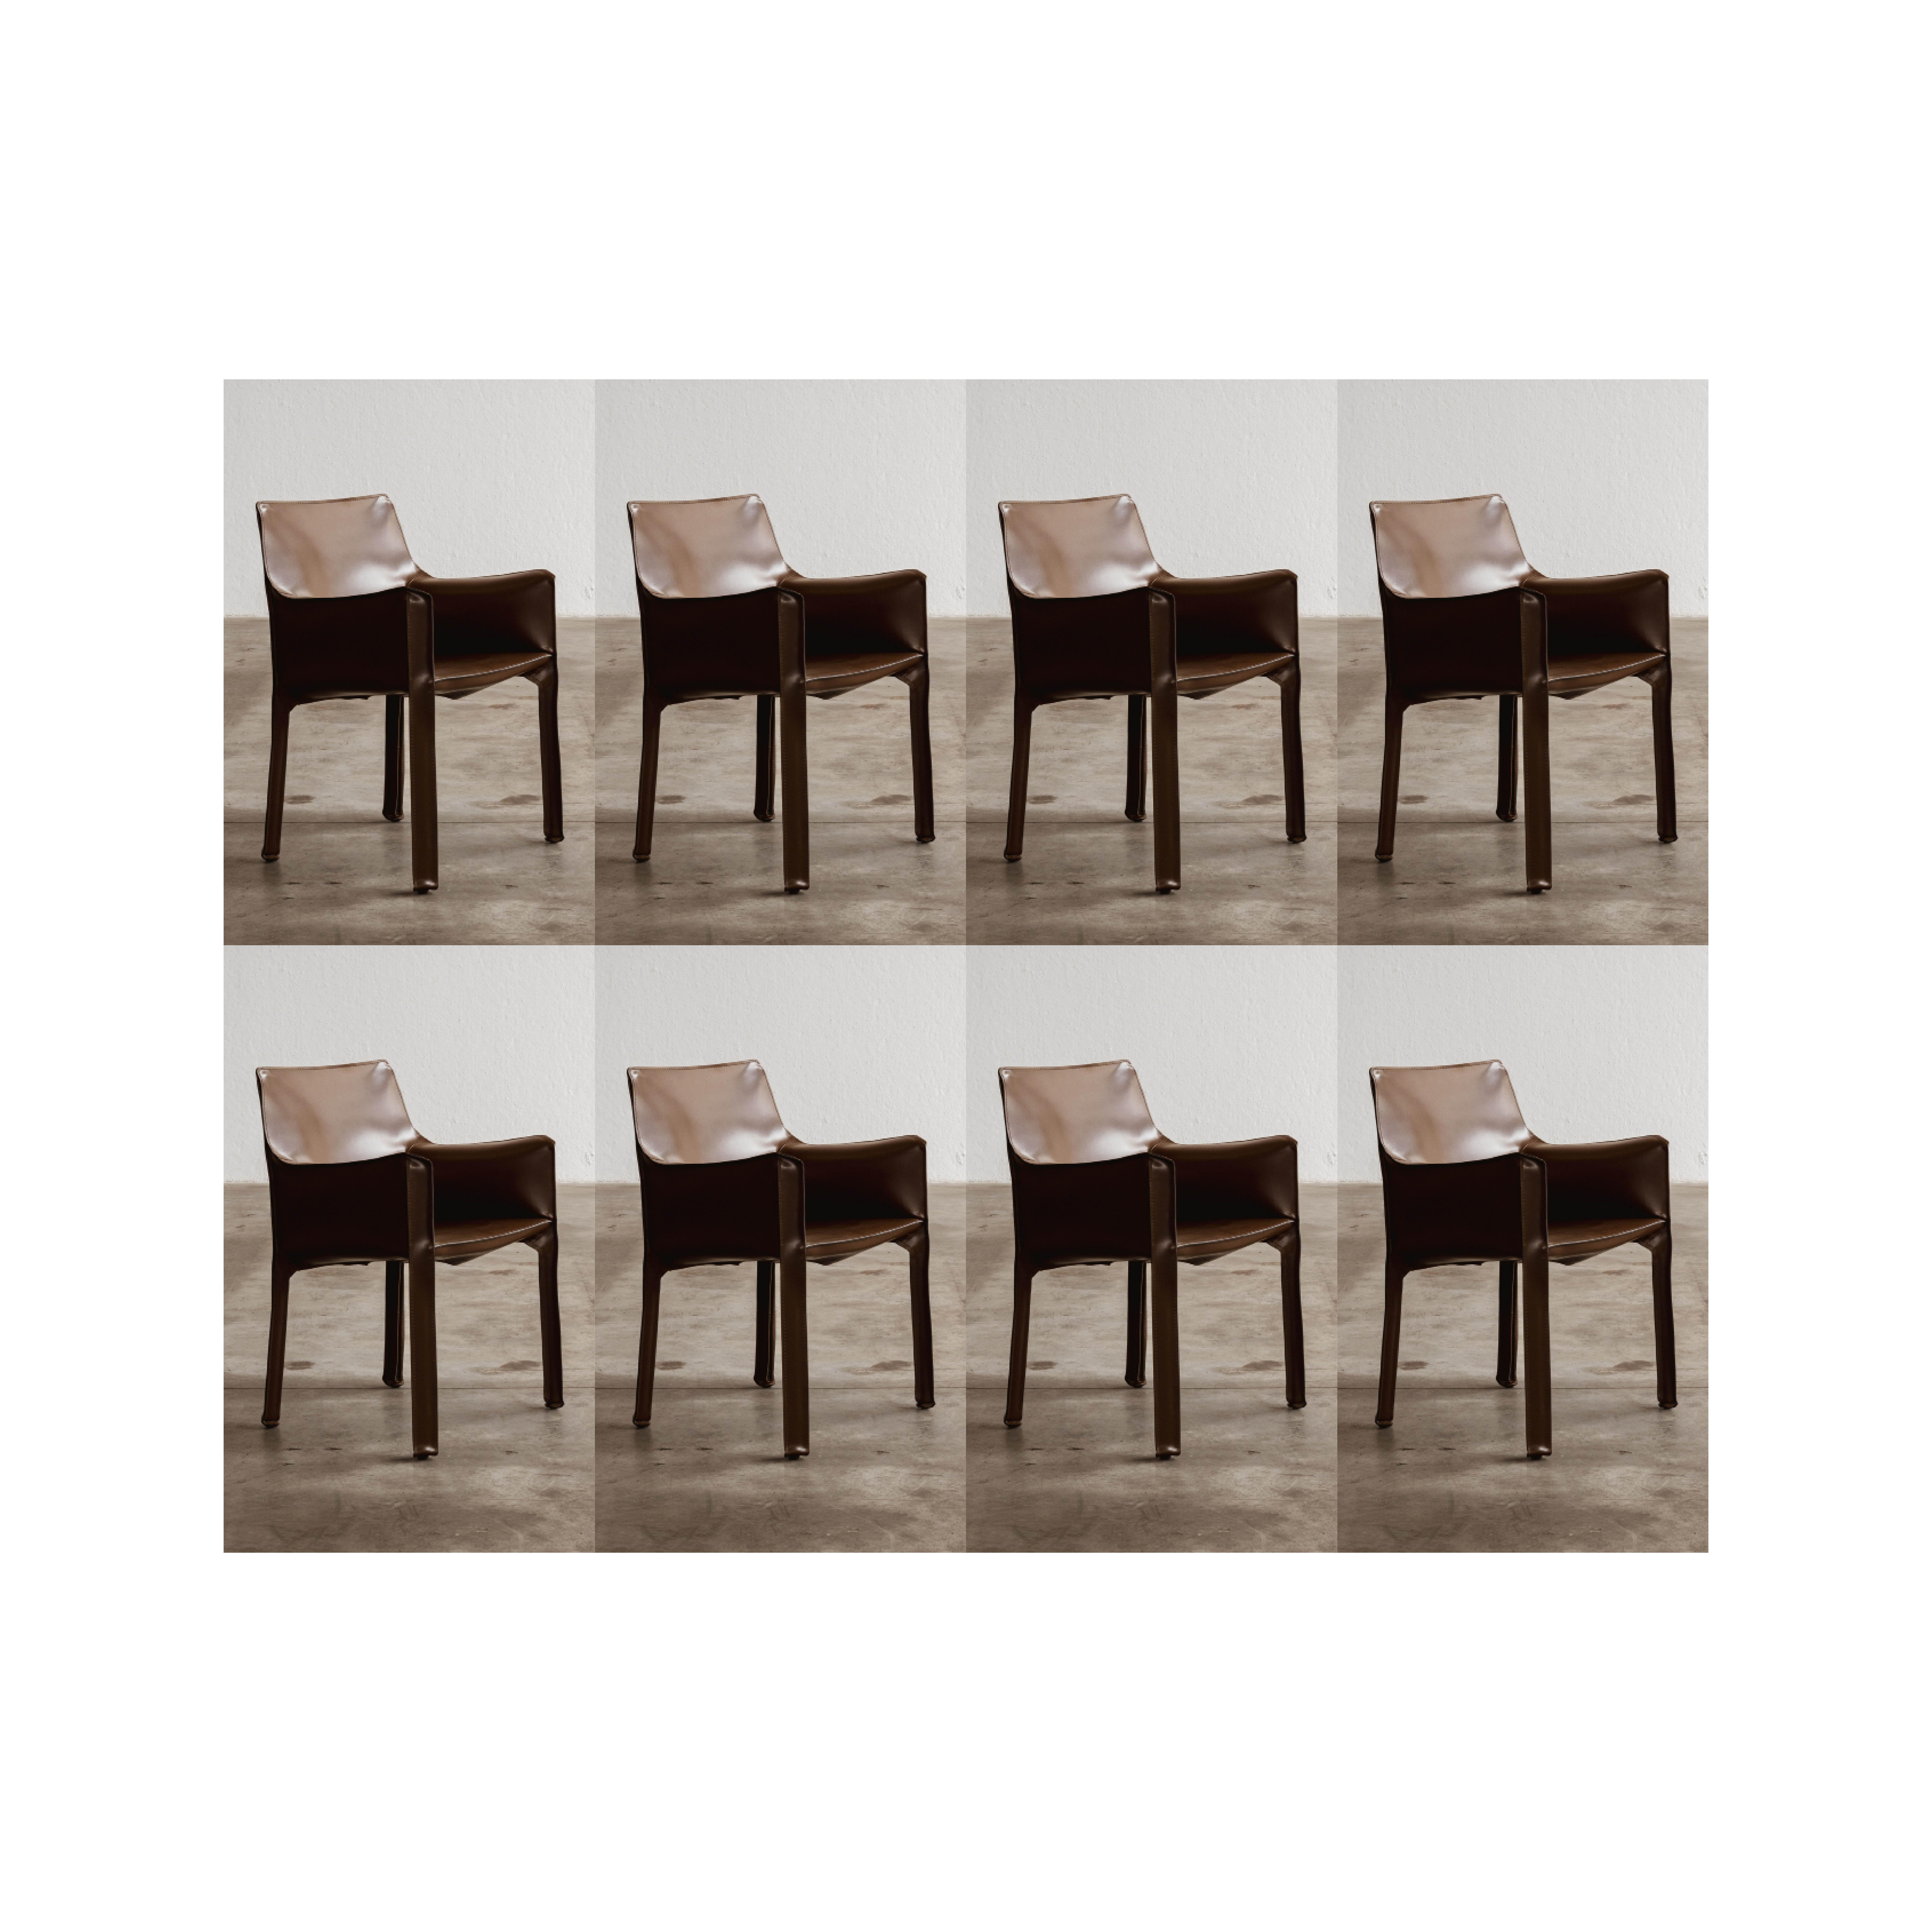 Mario Bellini "CAB 413" Chairs for Cassina in Dark Brown, 1977, Set of 8 For Sale